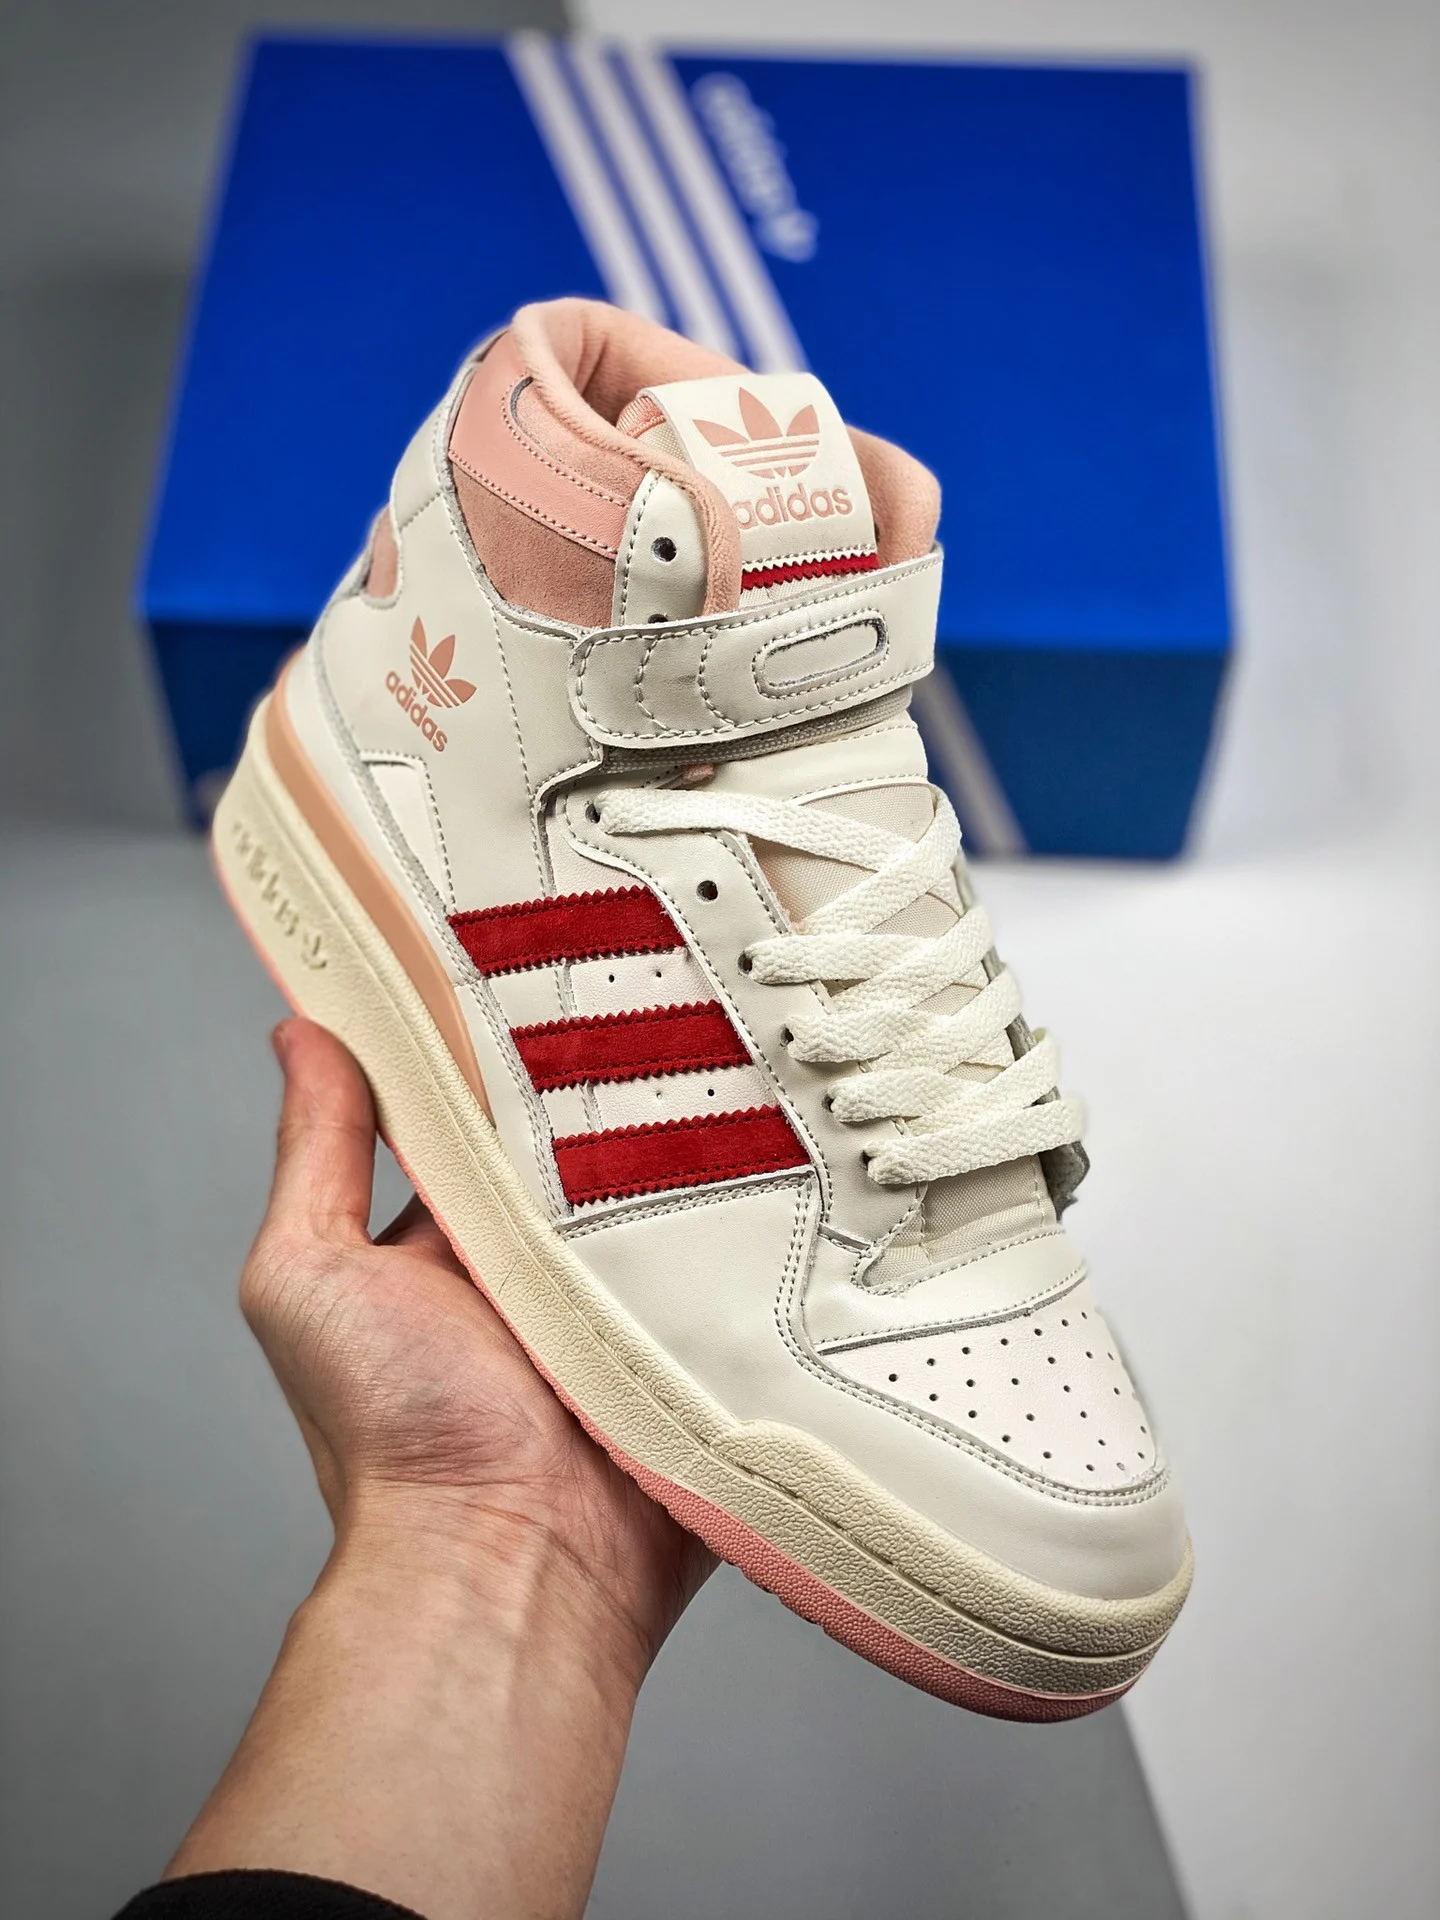 Adidas Forum 84 High Off White Pink Glow-Vivid Red For Sale